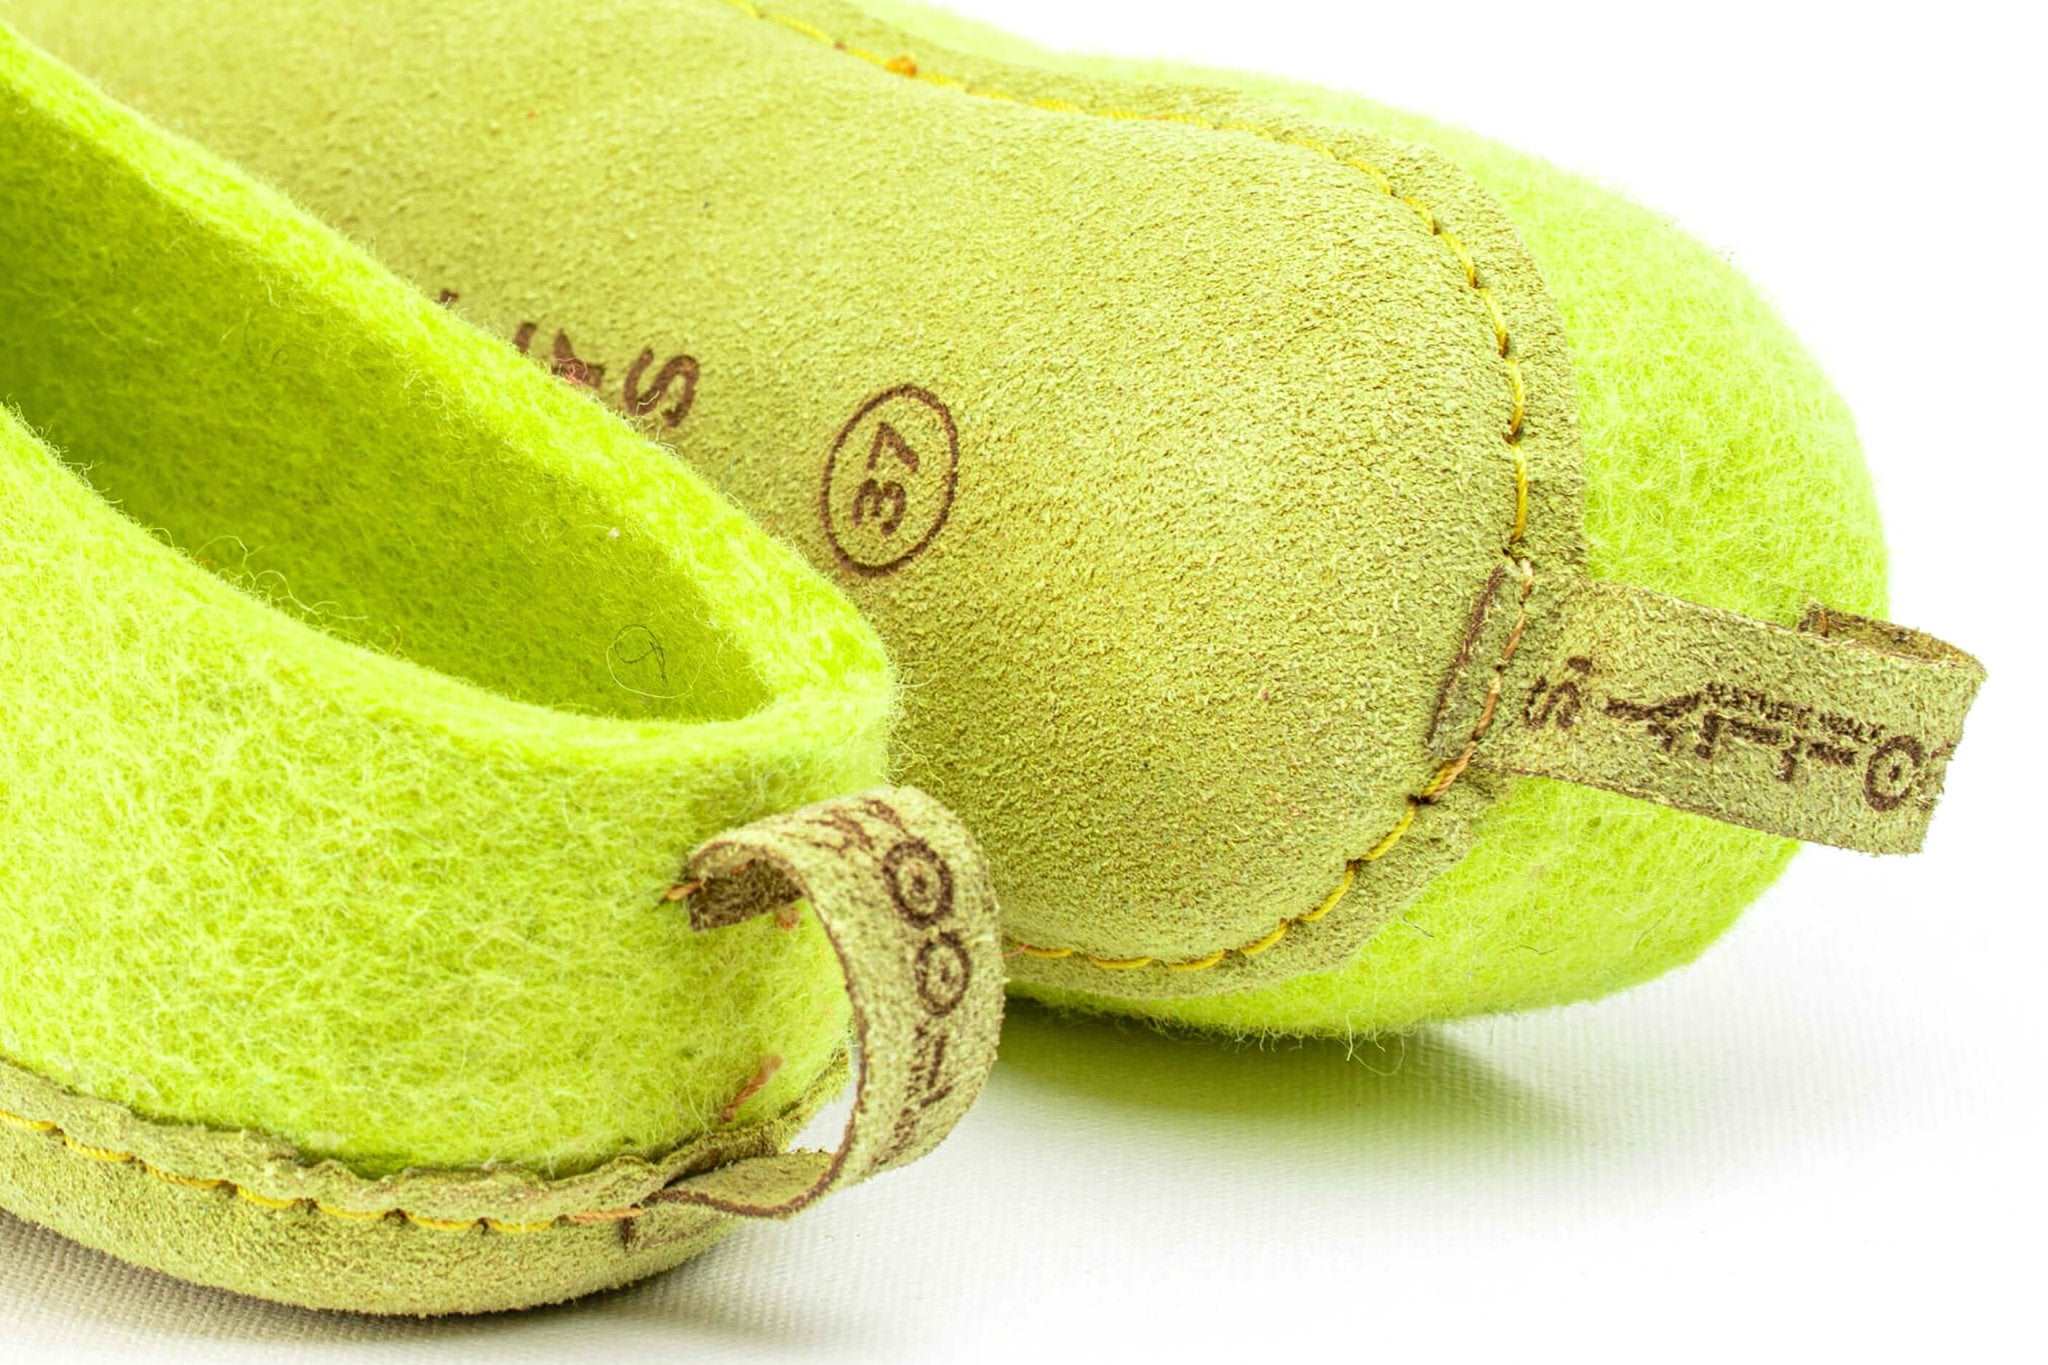 Indoor Open Heel Slippers With Leather Sole - Lime Green - Woollyes